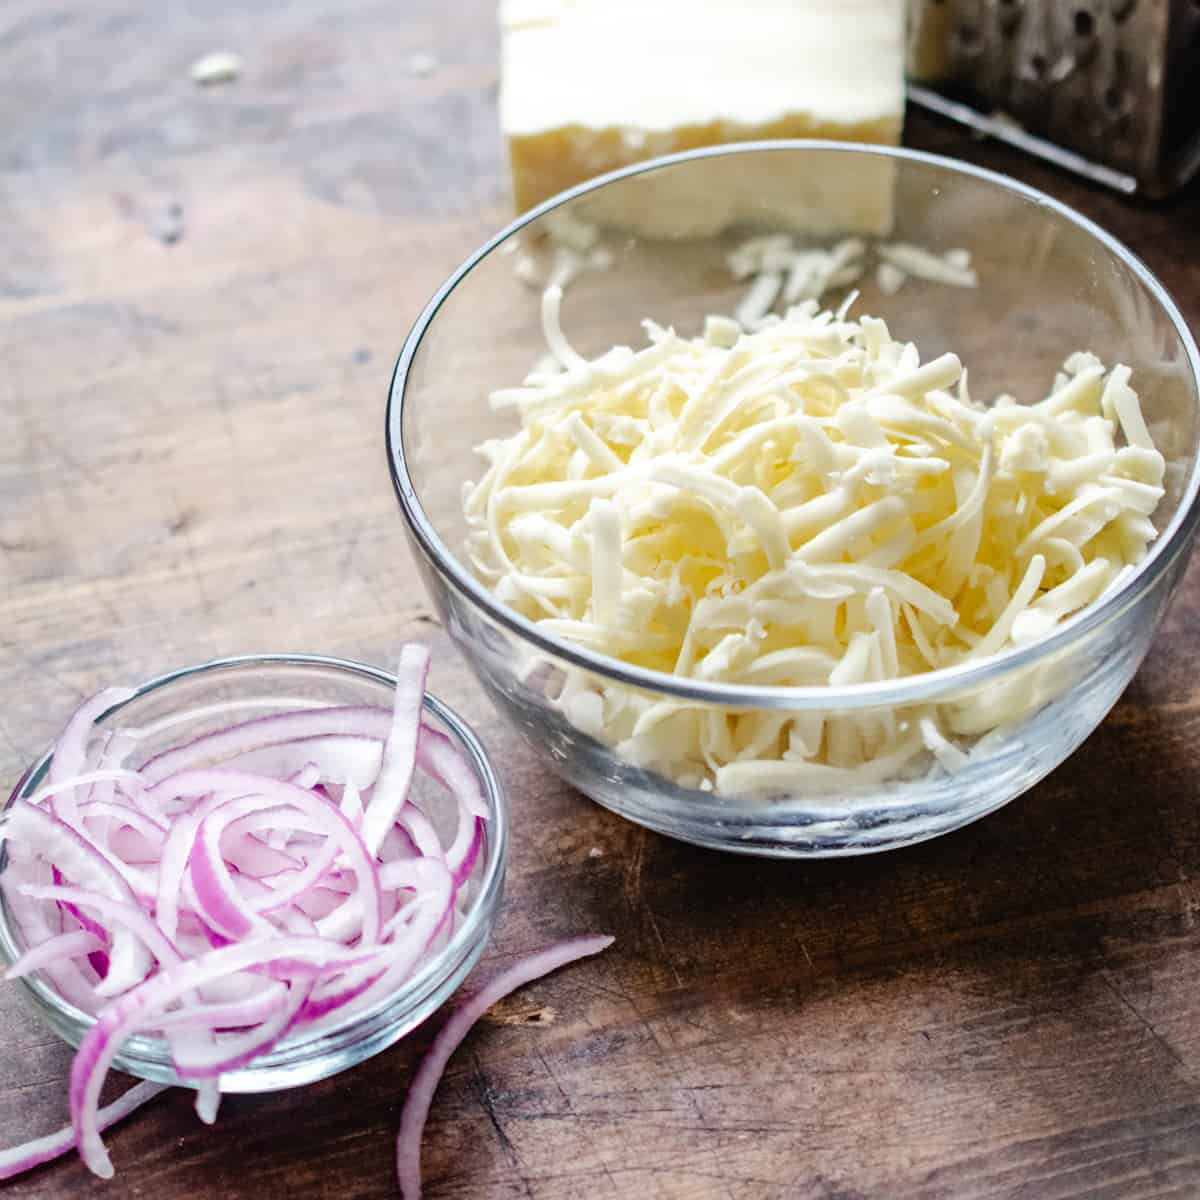 A glass bowl of sliced red onions and bowl of shredded mozzarella cheese and cheese grater on wooden surface.